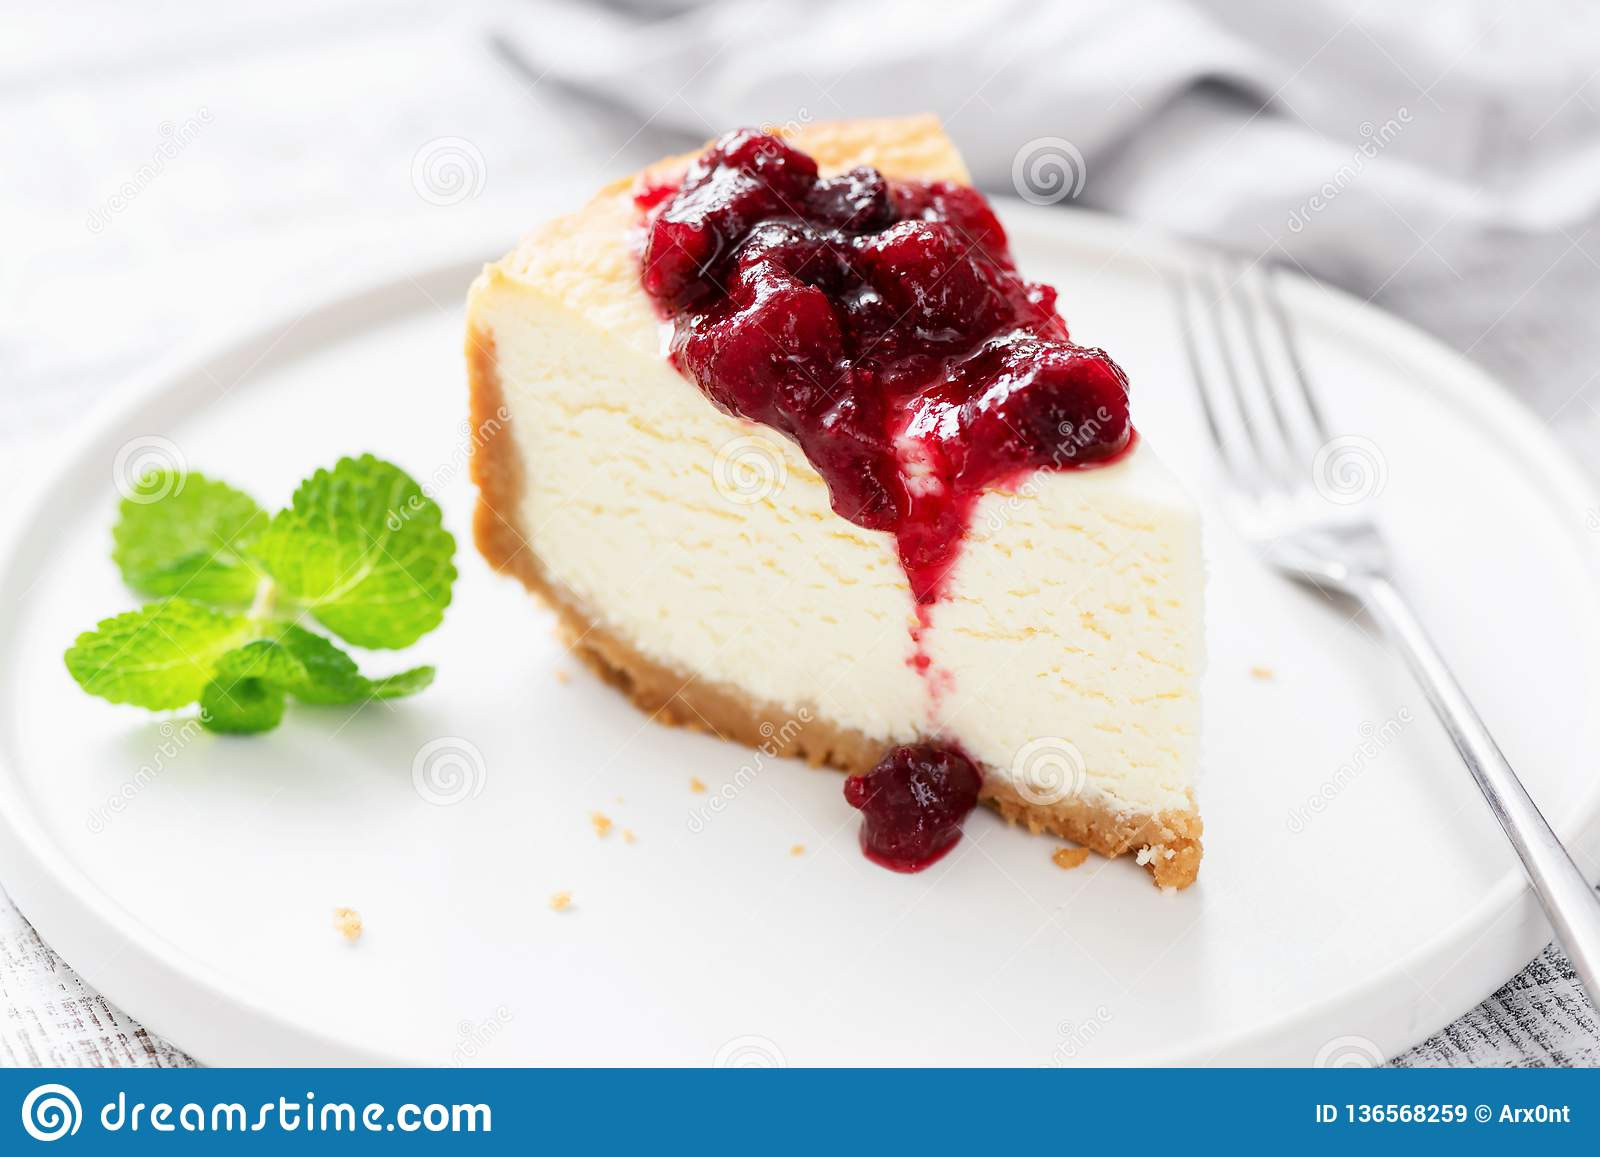 Cherry Sauce For Cheese Cake
 Classic Cheesecake With Cherry Sauce Stock Image Image